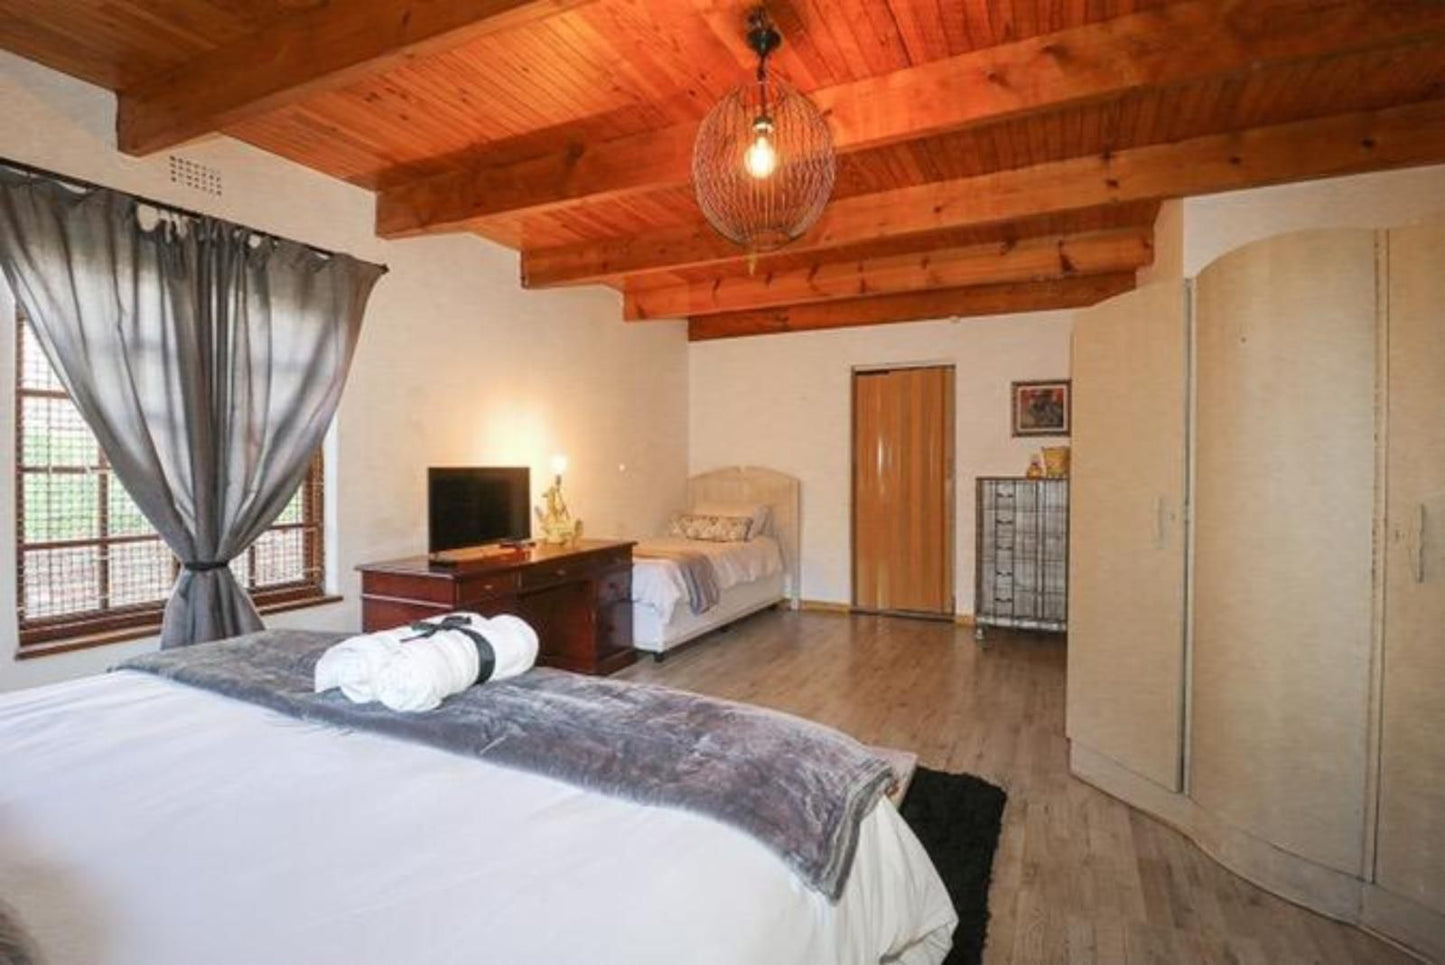 Swallows Nest Laingsburg Western Cape South Africa Bedroom